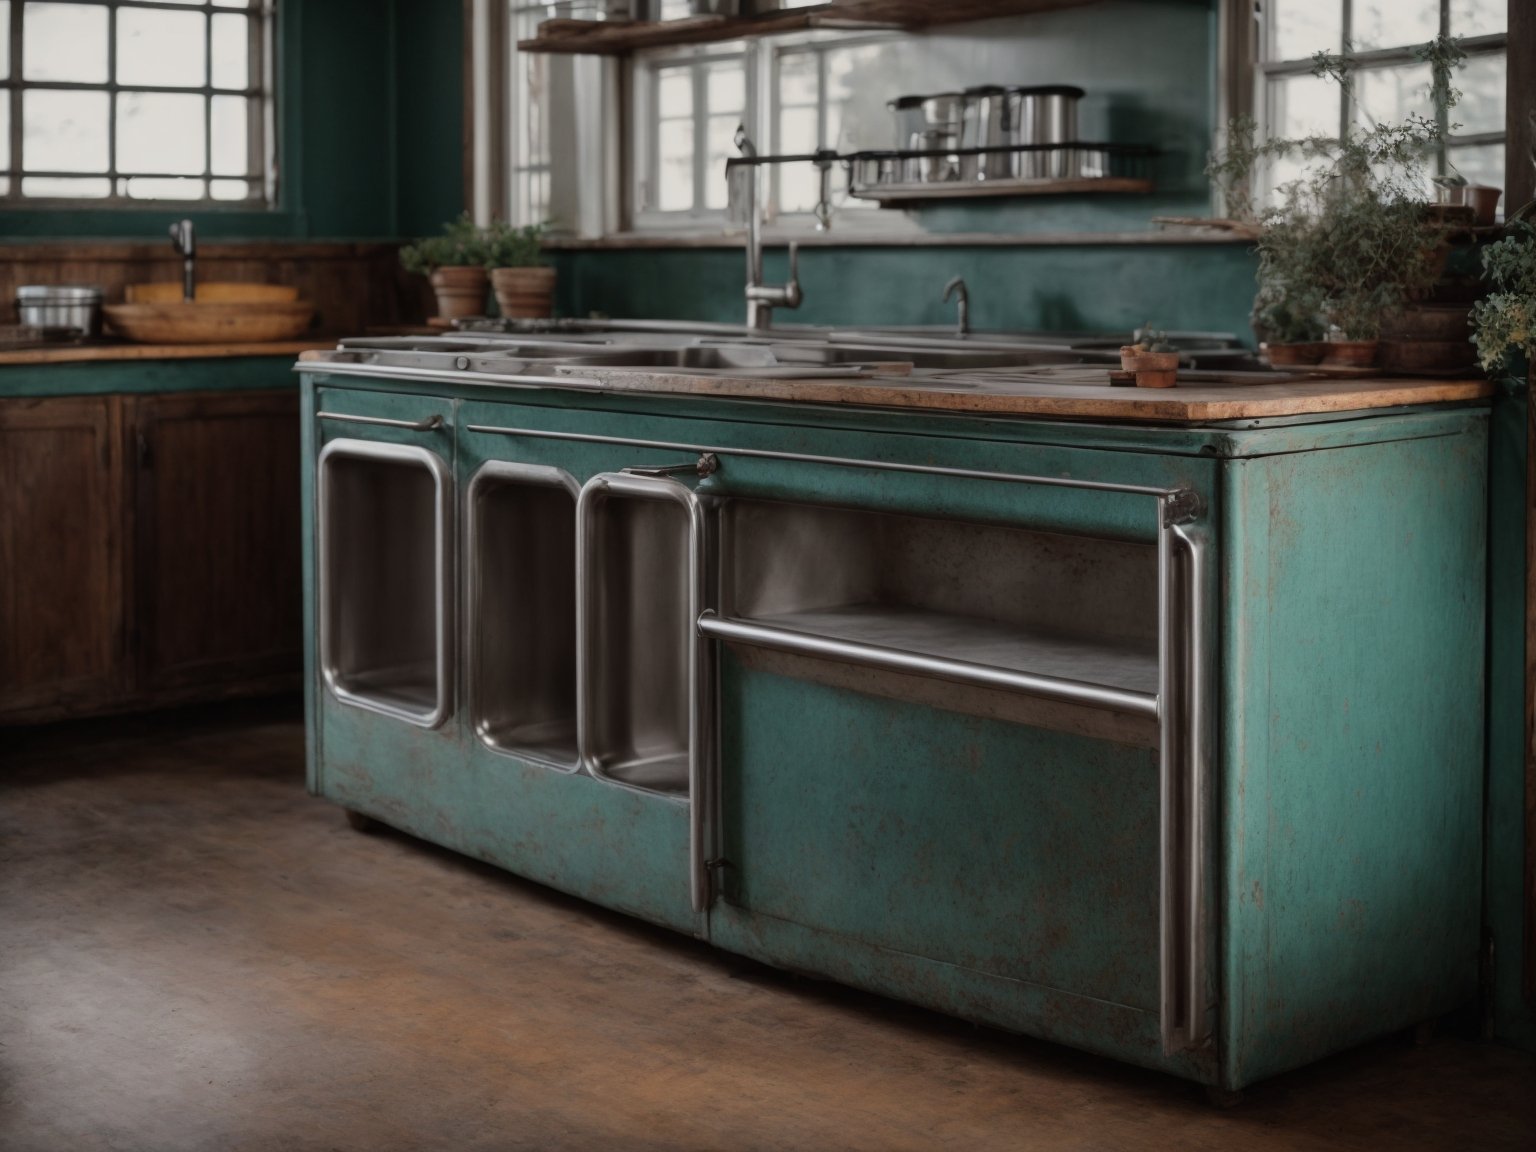 A retro-inspired metal kitchen sink cabinet for sale, offering a charming and durable storage solution for your kitchen.